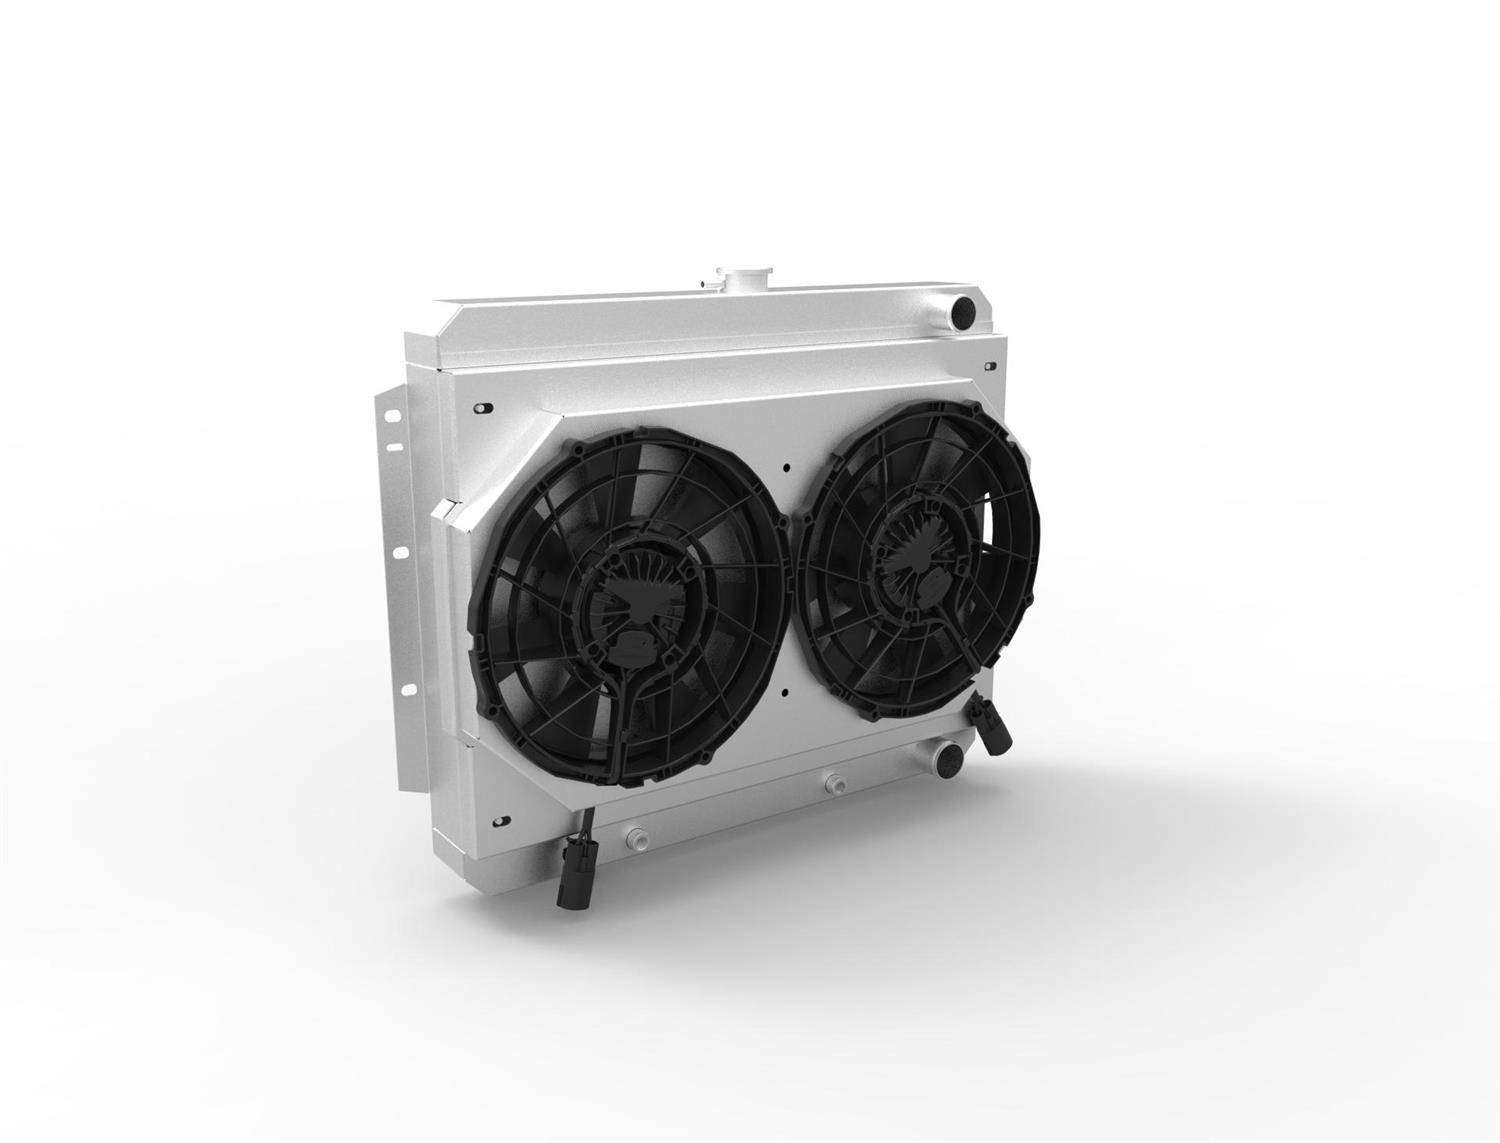 Wizard Cooling Inc - Wizard Cooling - 1959-1960 Chevrolet Bel Air/ Impala (17.5" Core) w/ Brushless Fan & Shroud - 10268-112BL